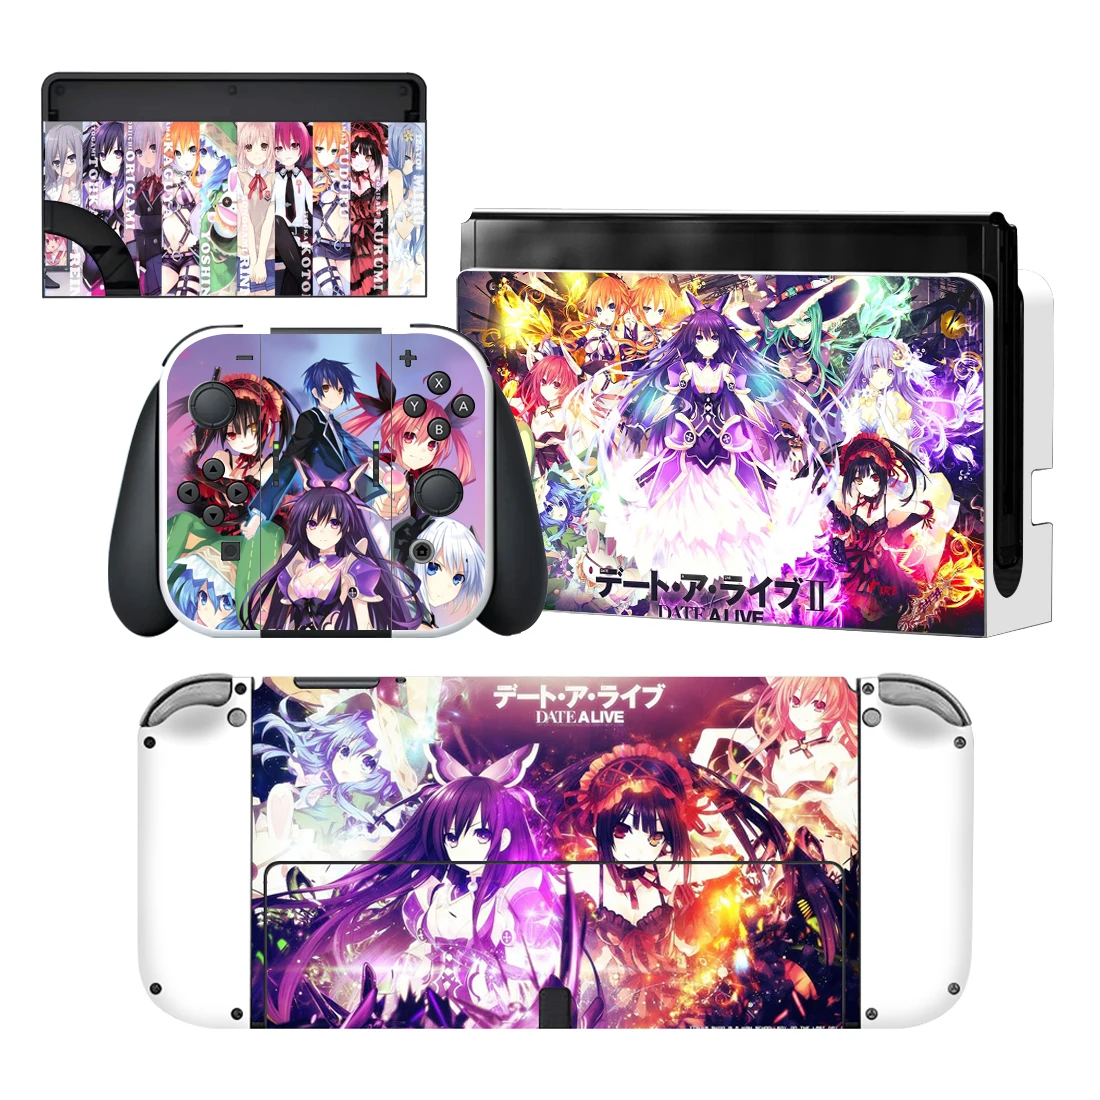 

DATE A LIVE Nintendoswitch Skin Cover Sticker Decal for Nintendo Switch NS OLED Console Joy-con Controller Dock Vinyl